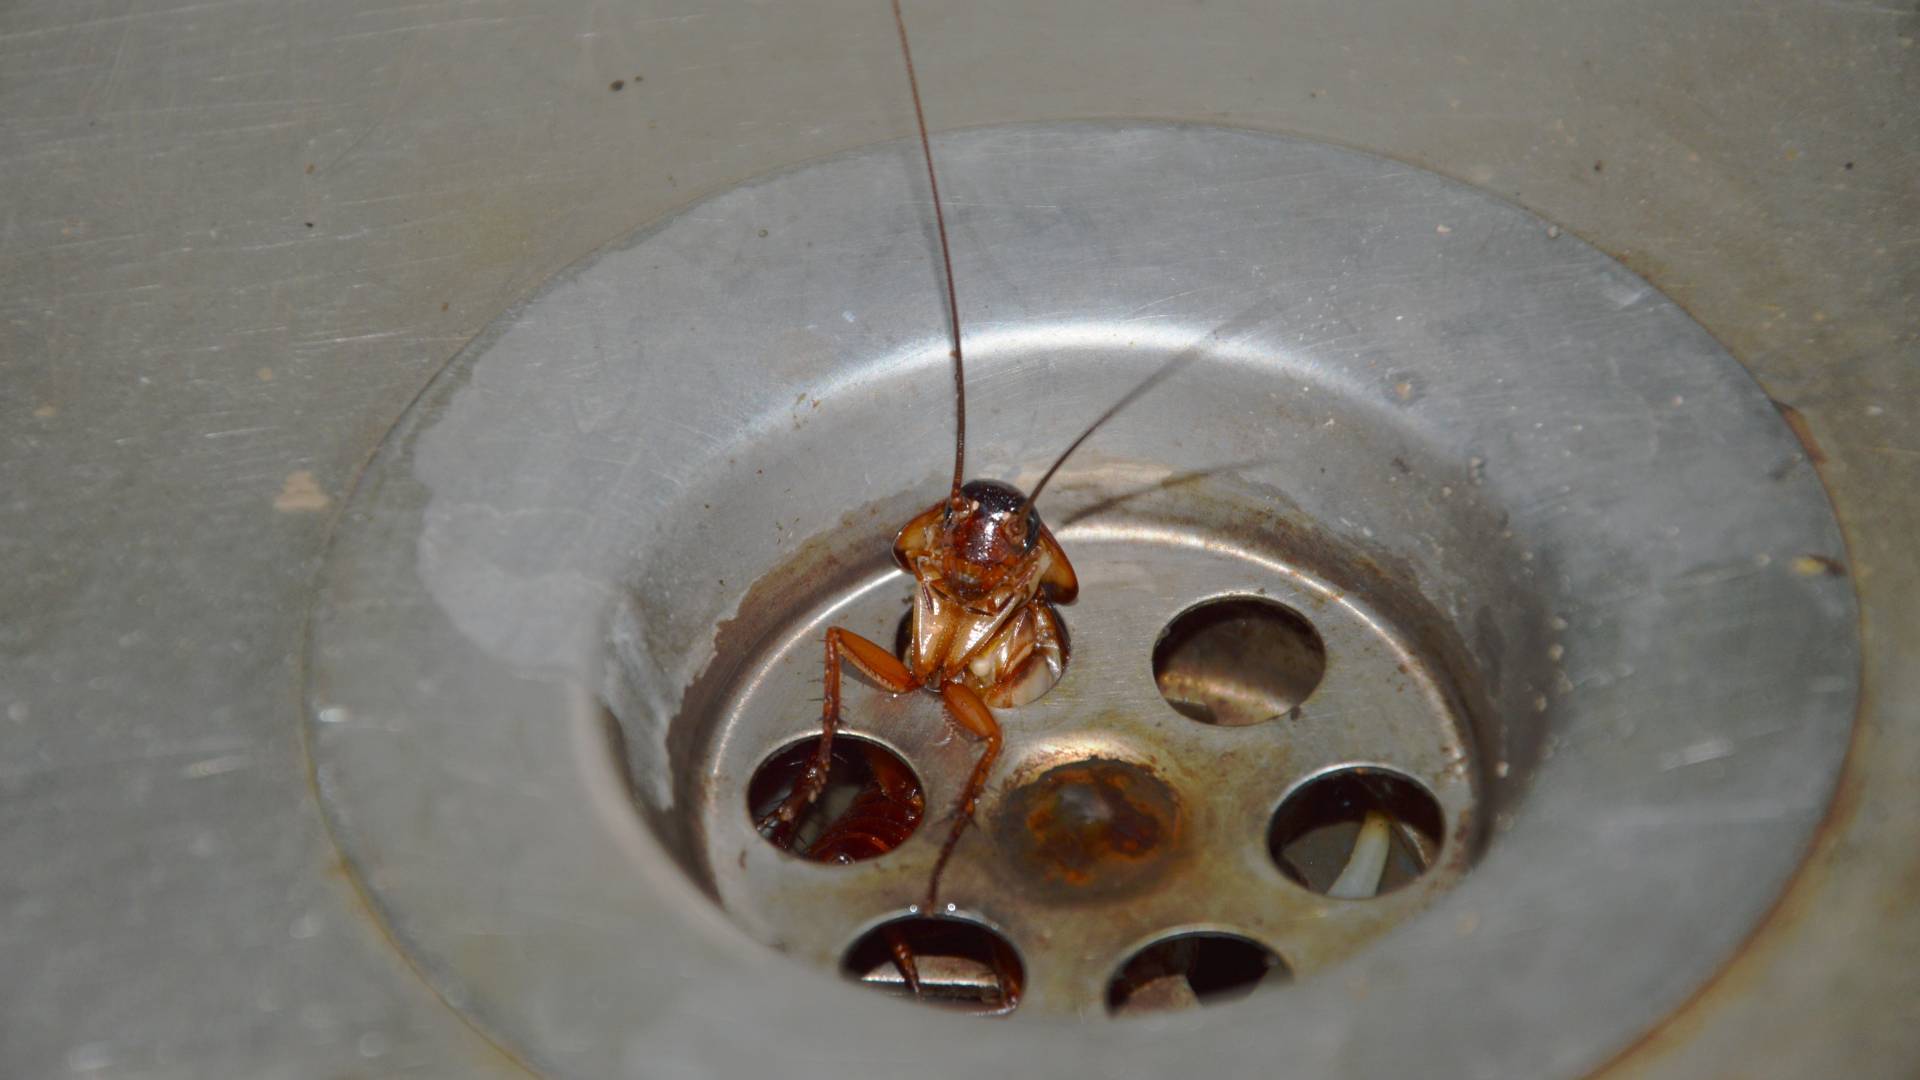 a cockroach coming out of a sink